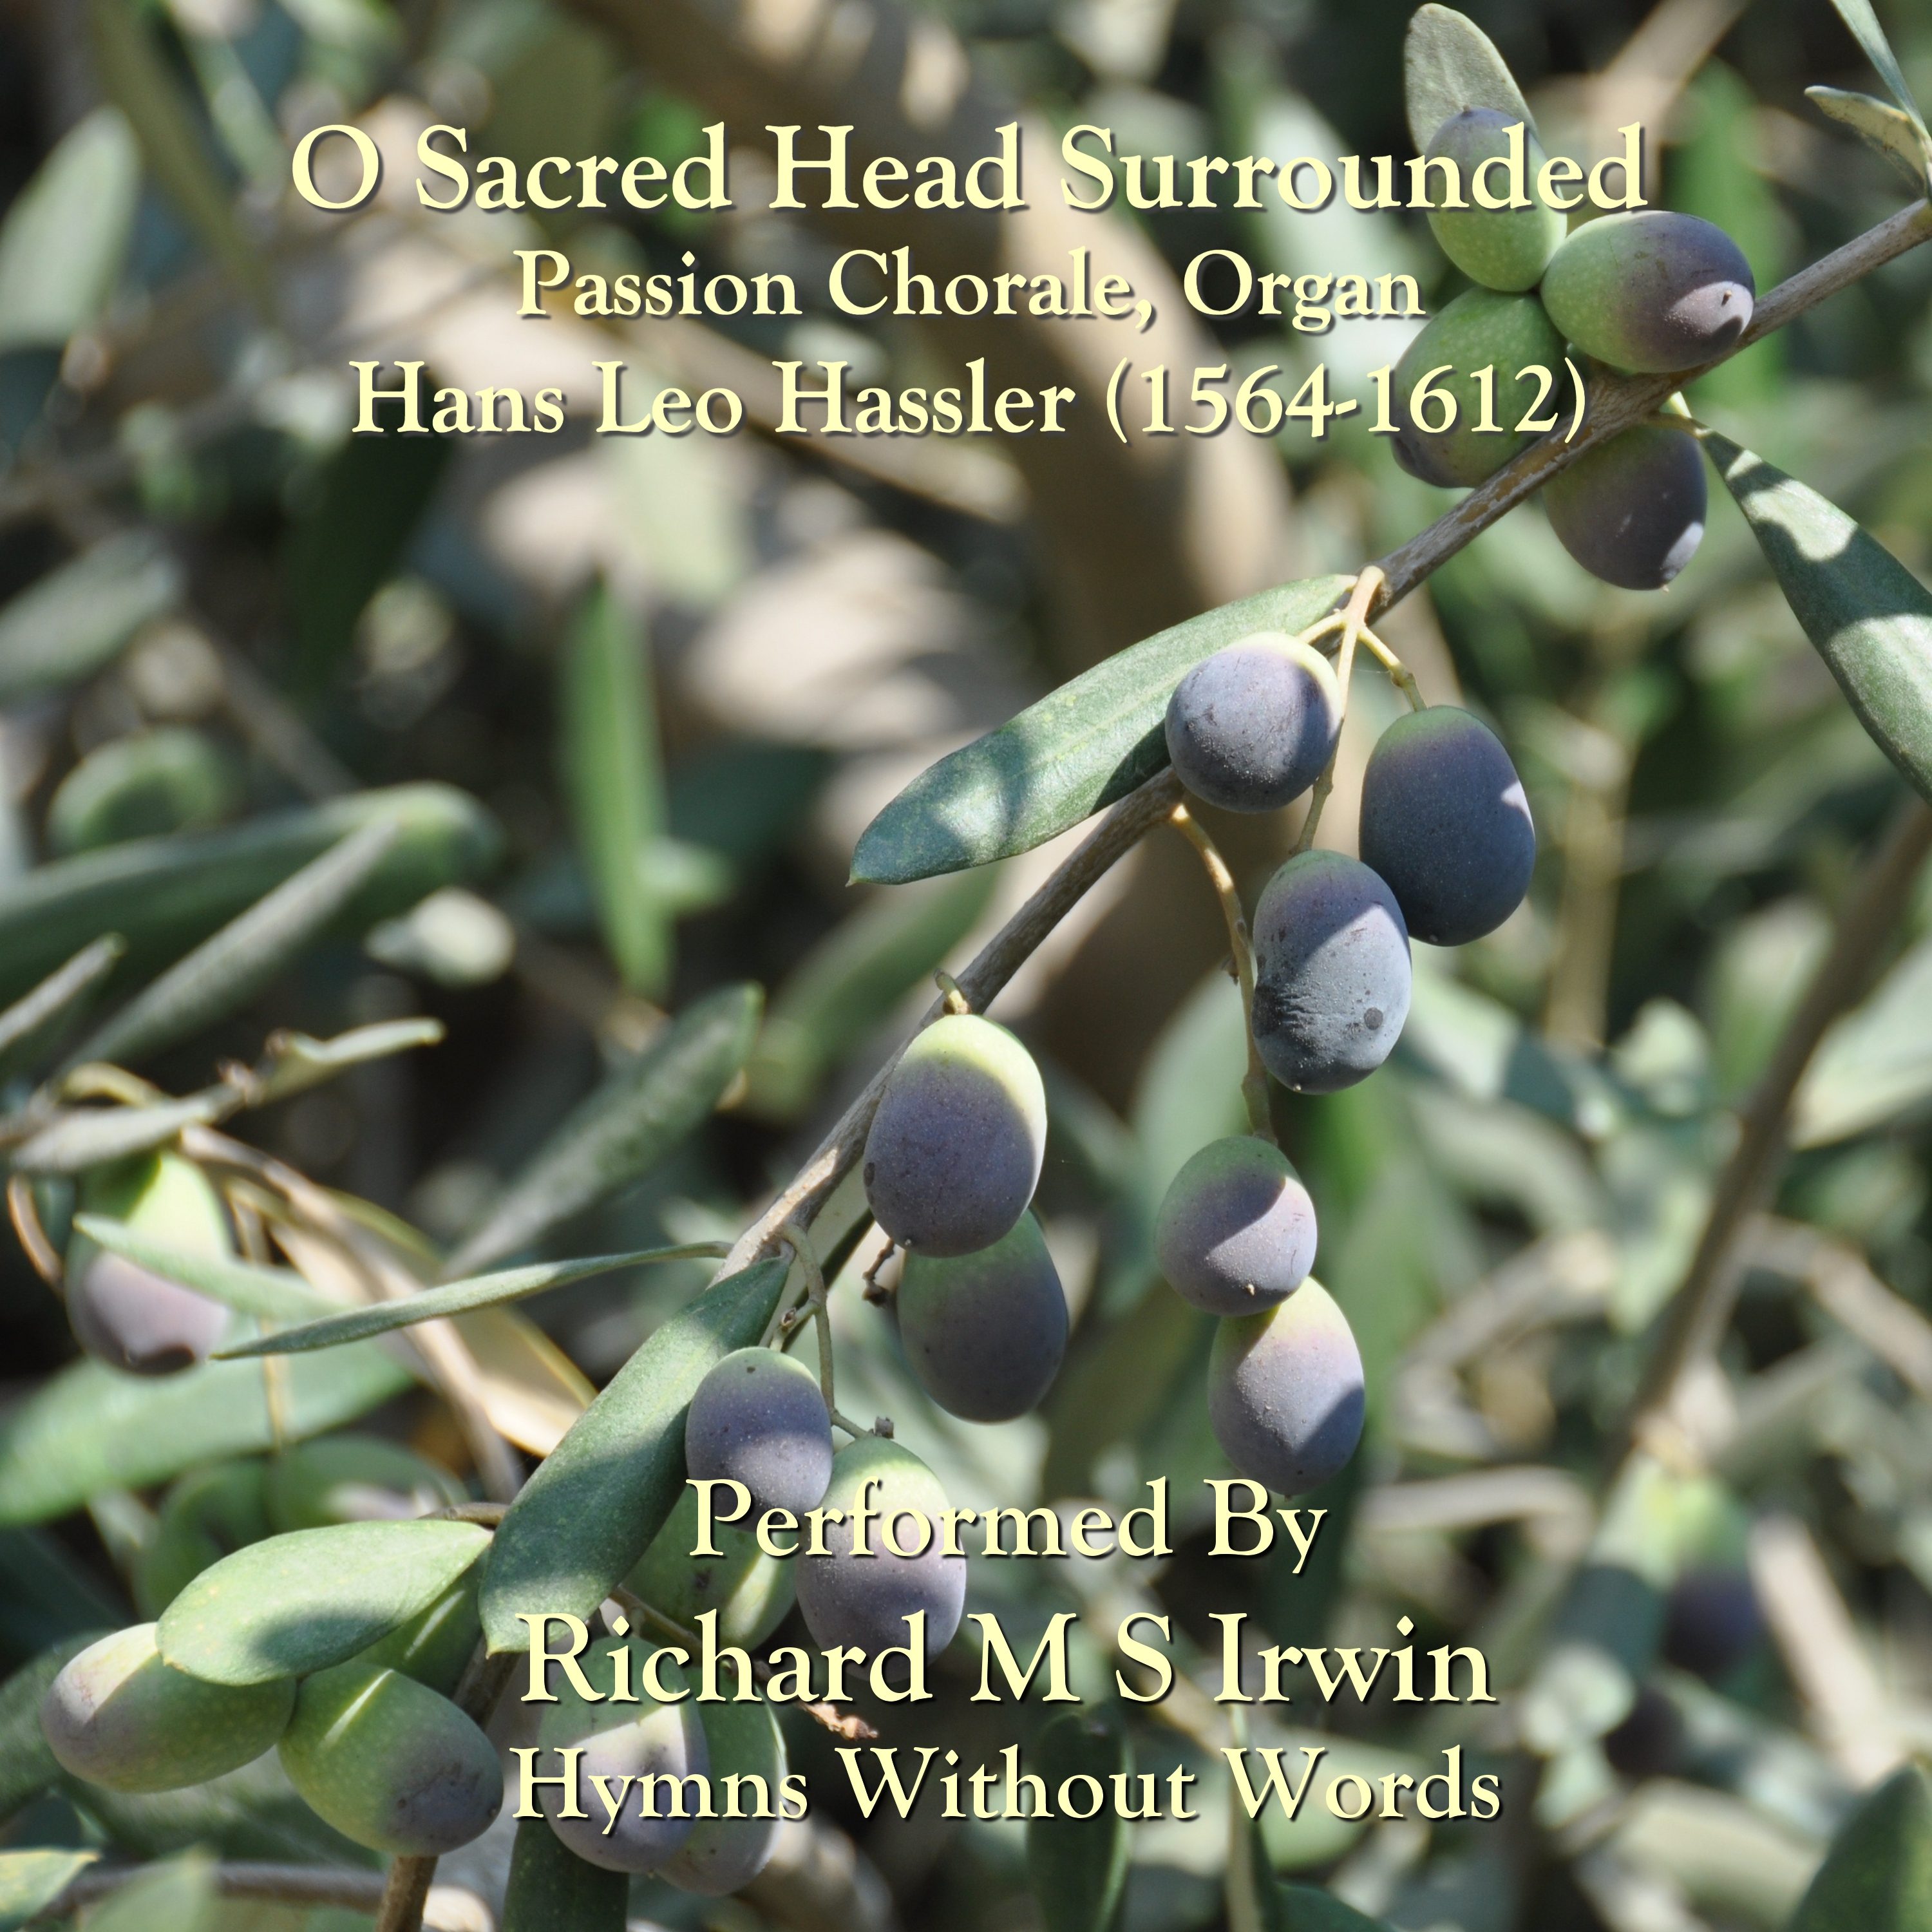 O Sacred Head Surrounded (Passion Chorale, Organ, 3 Verses)